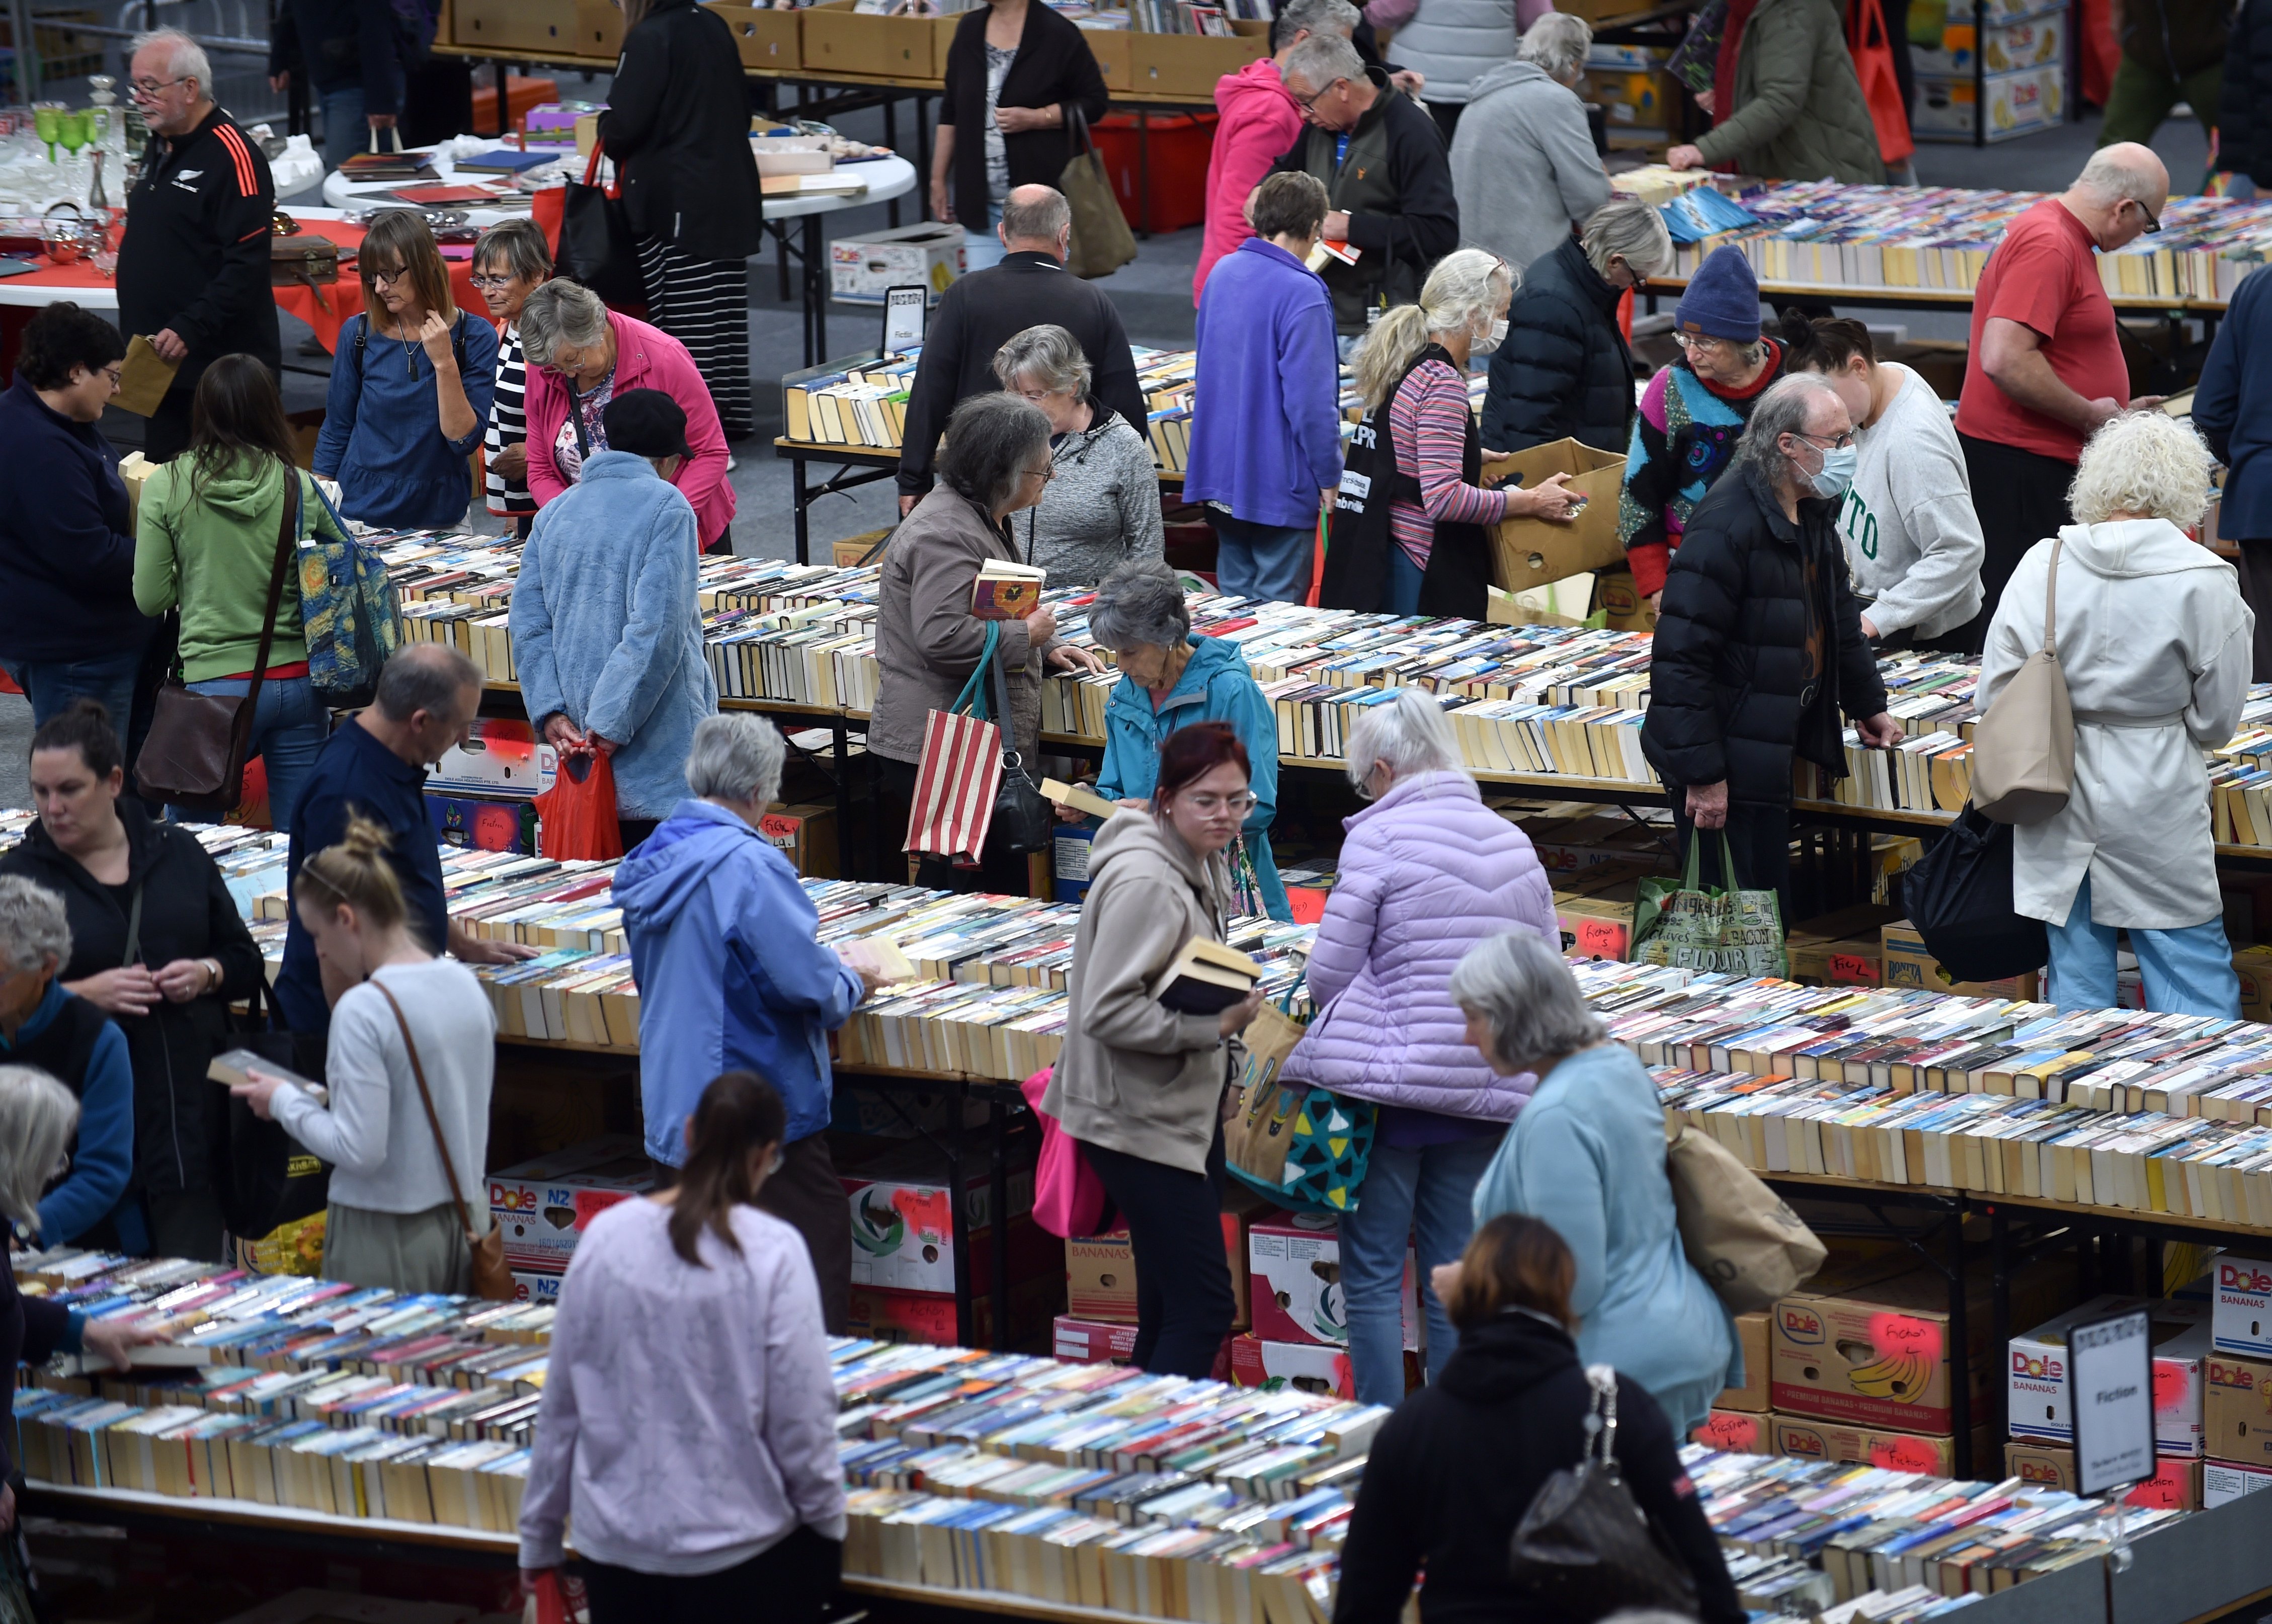 Readers searching for treasures at The Star Regent 24 Hour Book sale. PHOTO: PETER MCINTOSH